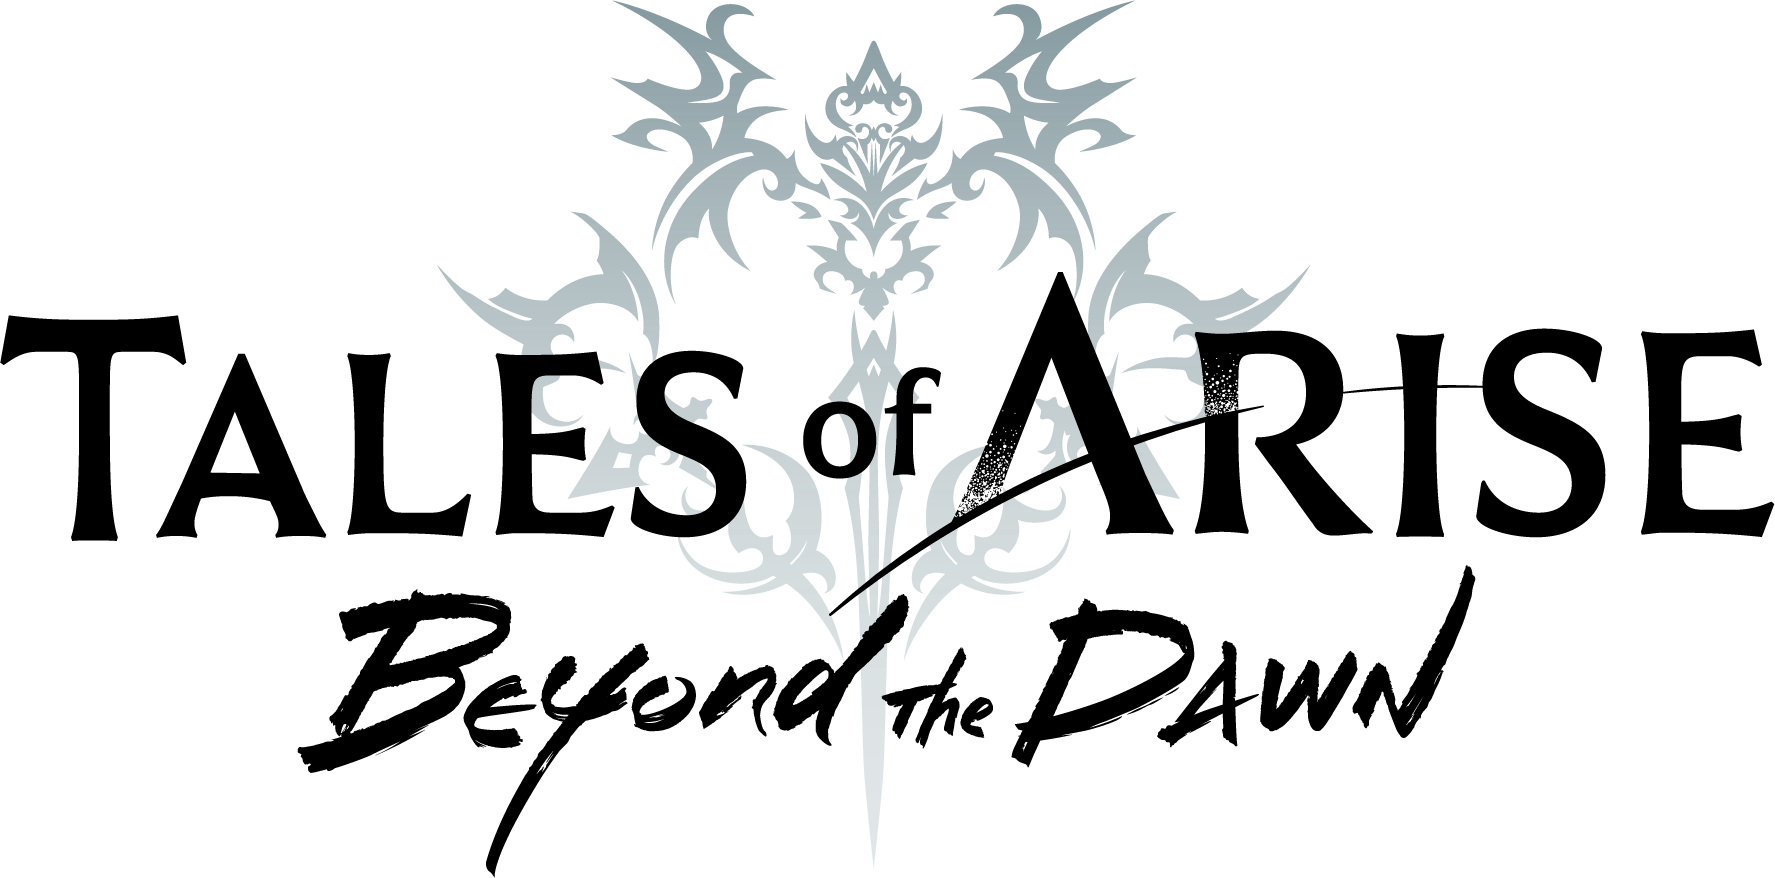 Tales of Arise - L'extension Tales of Arise - Beyond the Dawn désormais disponible sur consoles et PC - GEEKNPLAY Home, News, PC, PlayStation 4, PlayStation 5, Xbox One, Xbox Series X|S